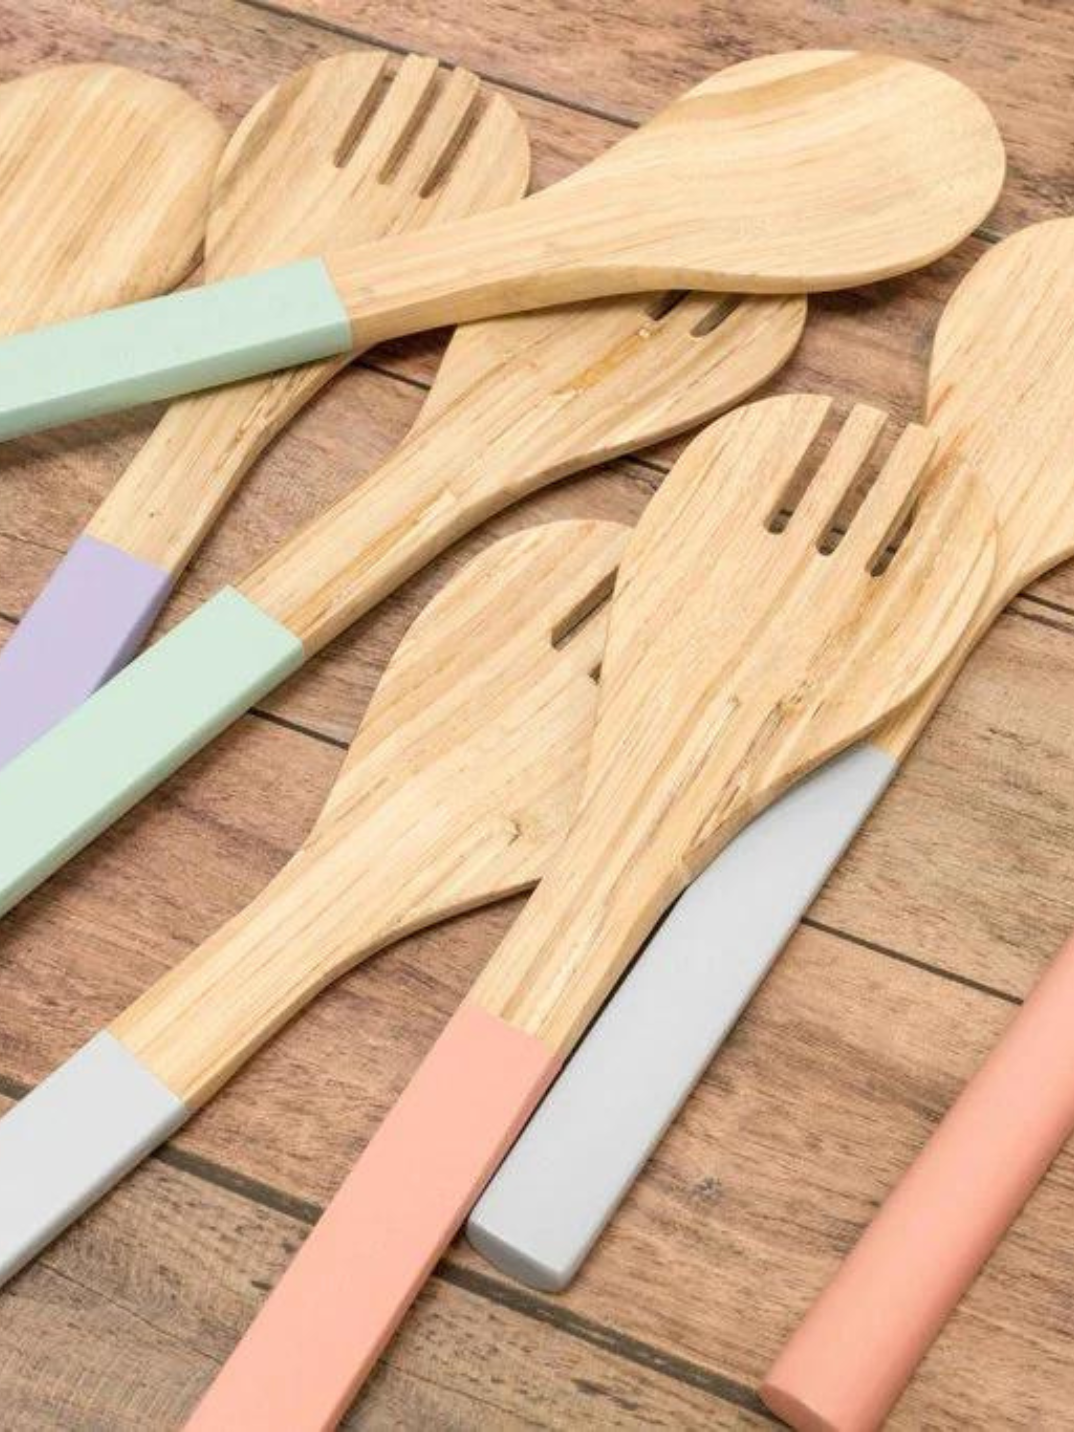 These fair trade bamboo serving utensils are great for both entertaining and everyday use. Editors' notes: Hand shaped by a women's group using local bamboo in a Vietnamese village, this bamboo serving utensils are produced to the highest environmental and social standards. 100% natural, high quality, ethically-made, and eco-friendly.